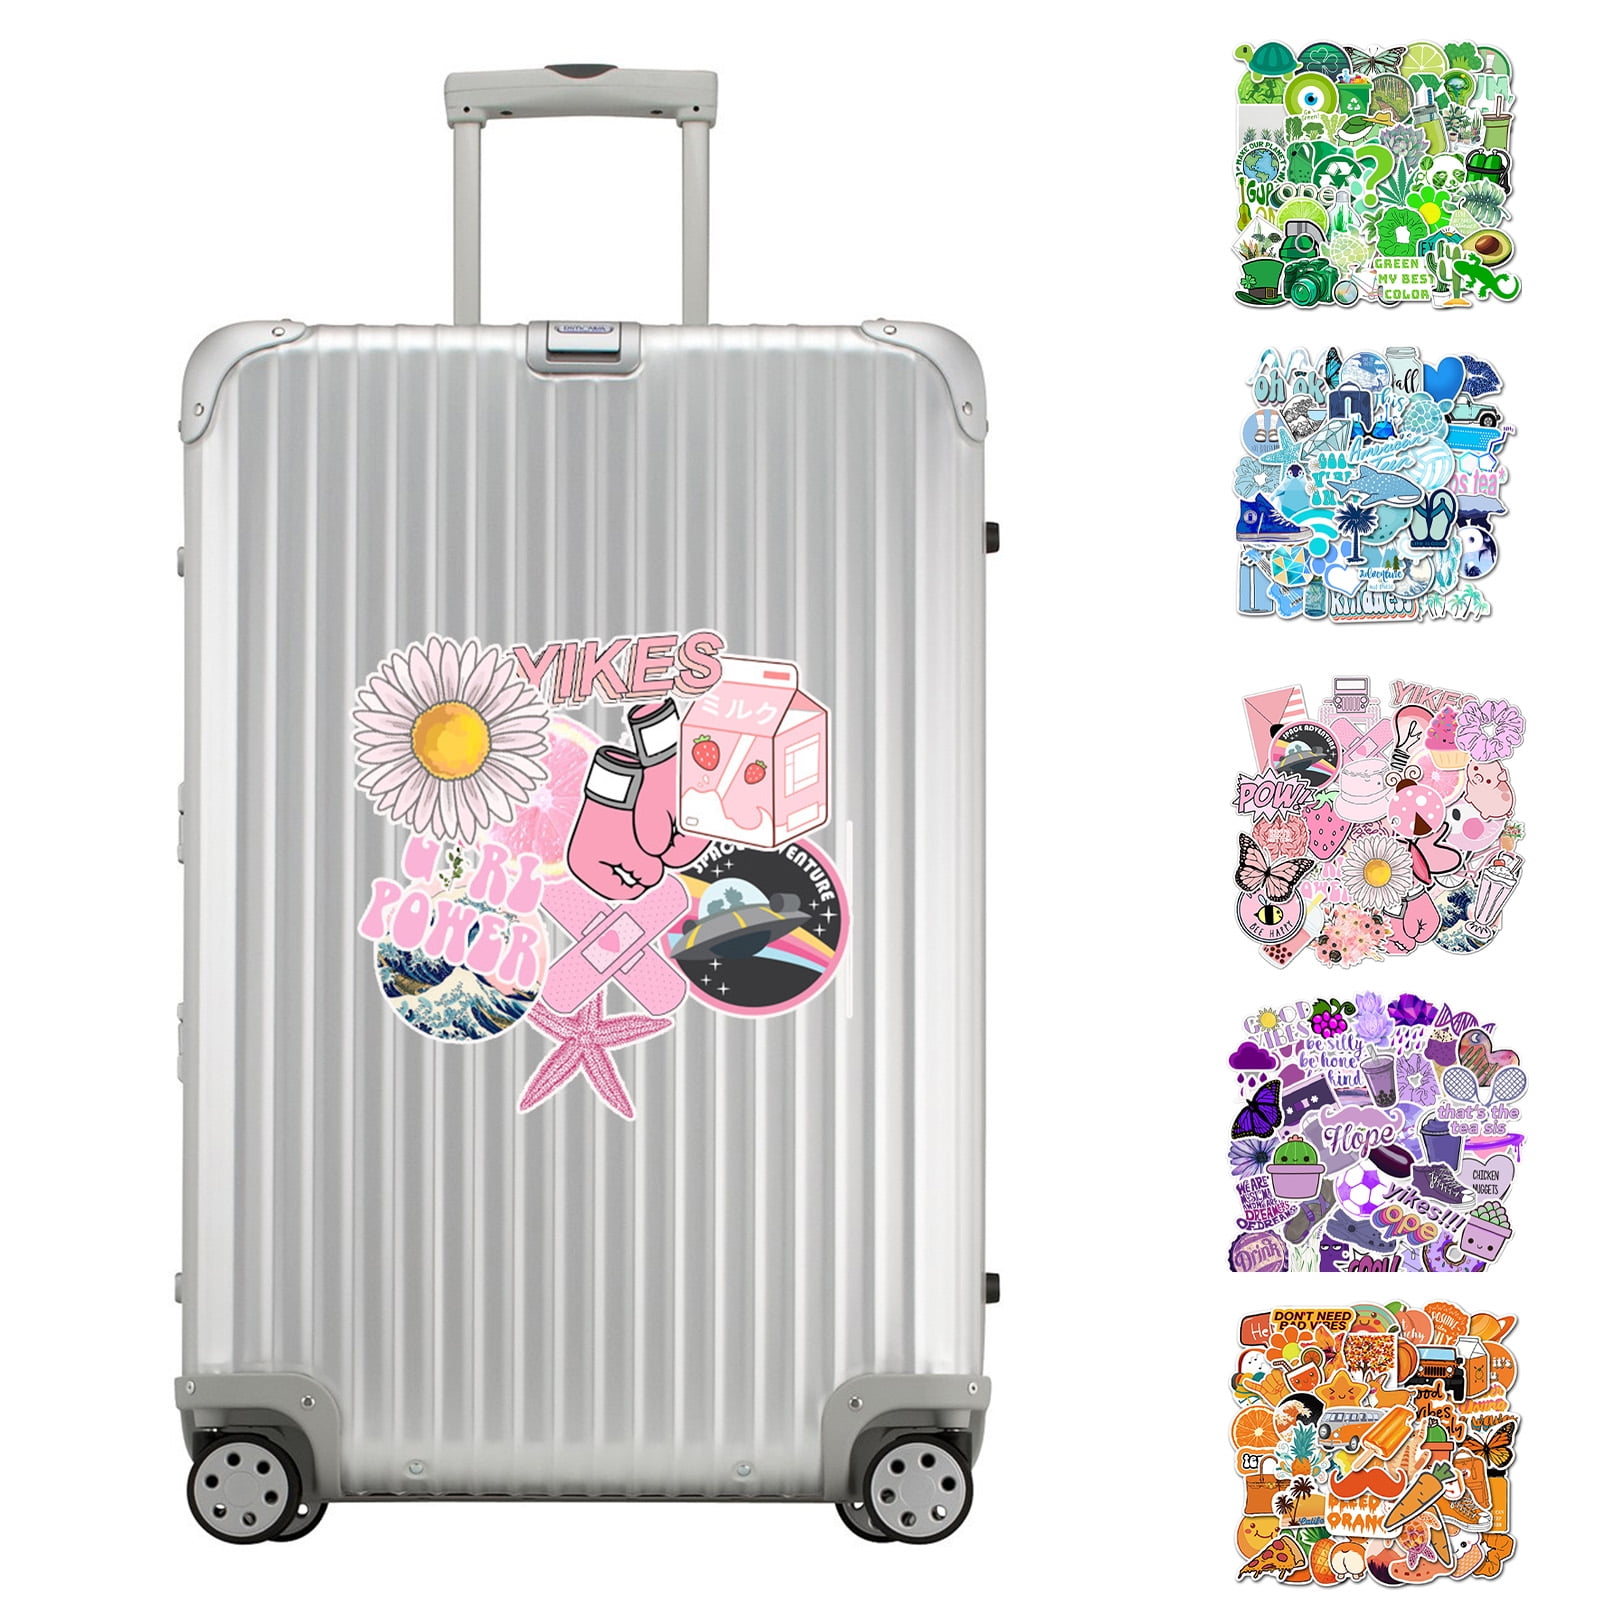 VILLCASE 3 Sets Scrapbook Decor Waterproof Stickers Luggage Stickers Pretty  Stickers Small Stickers Hand Account DIY Stickers pet Flower Sticker Chic